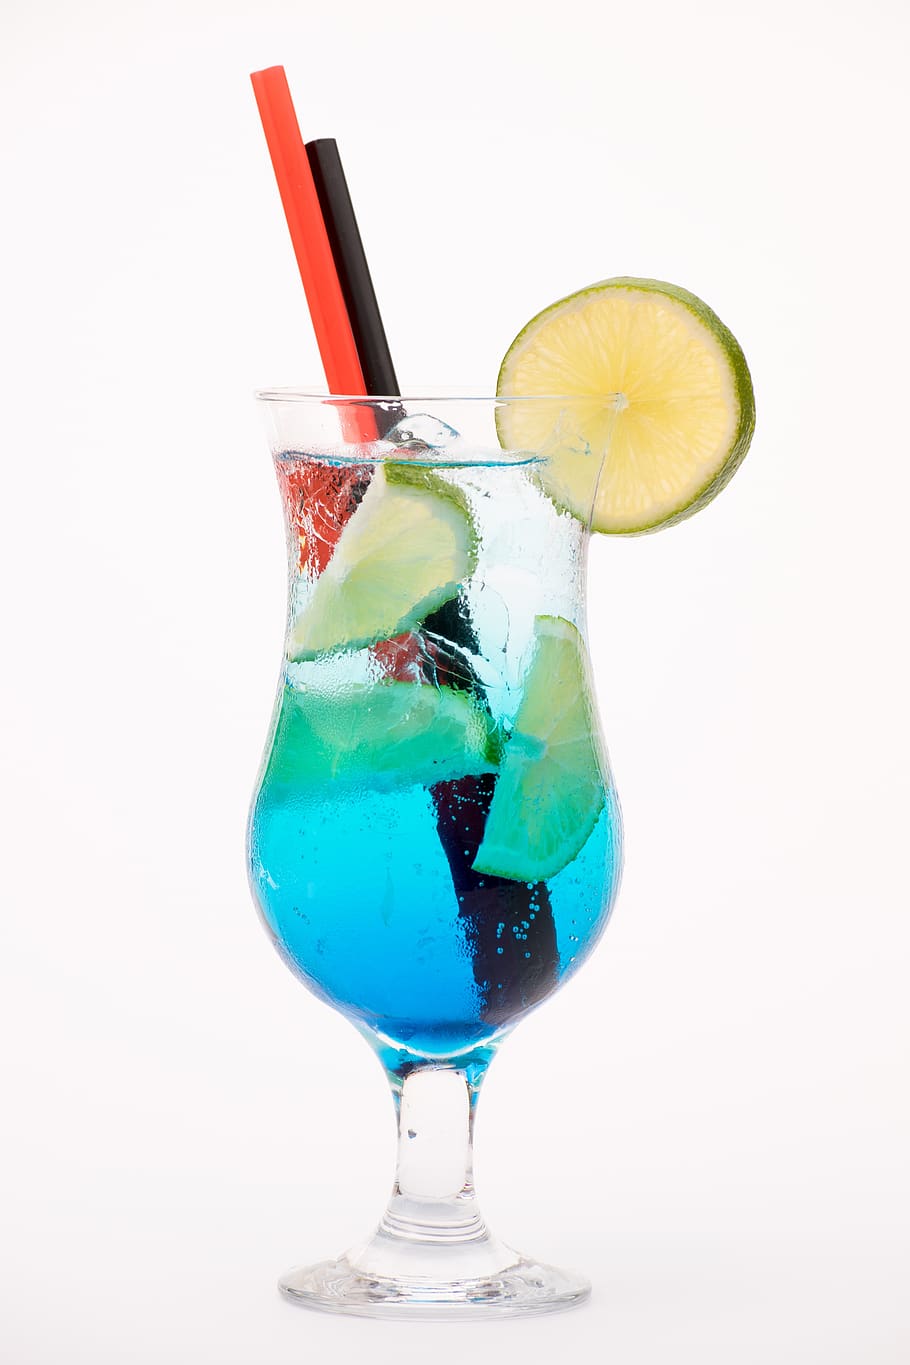 lime, glass, blue, citrus, cocktail, drink, thirst, cold, gin, alcohol